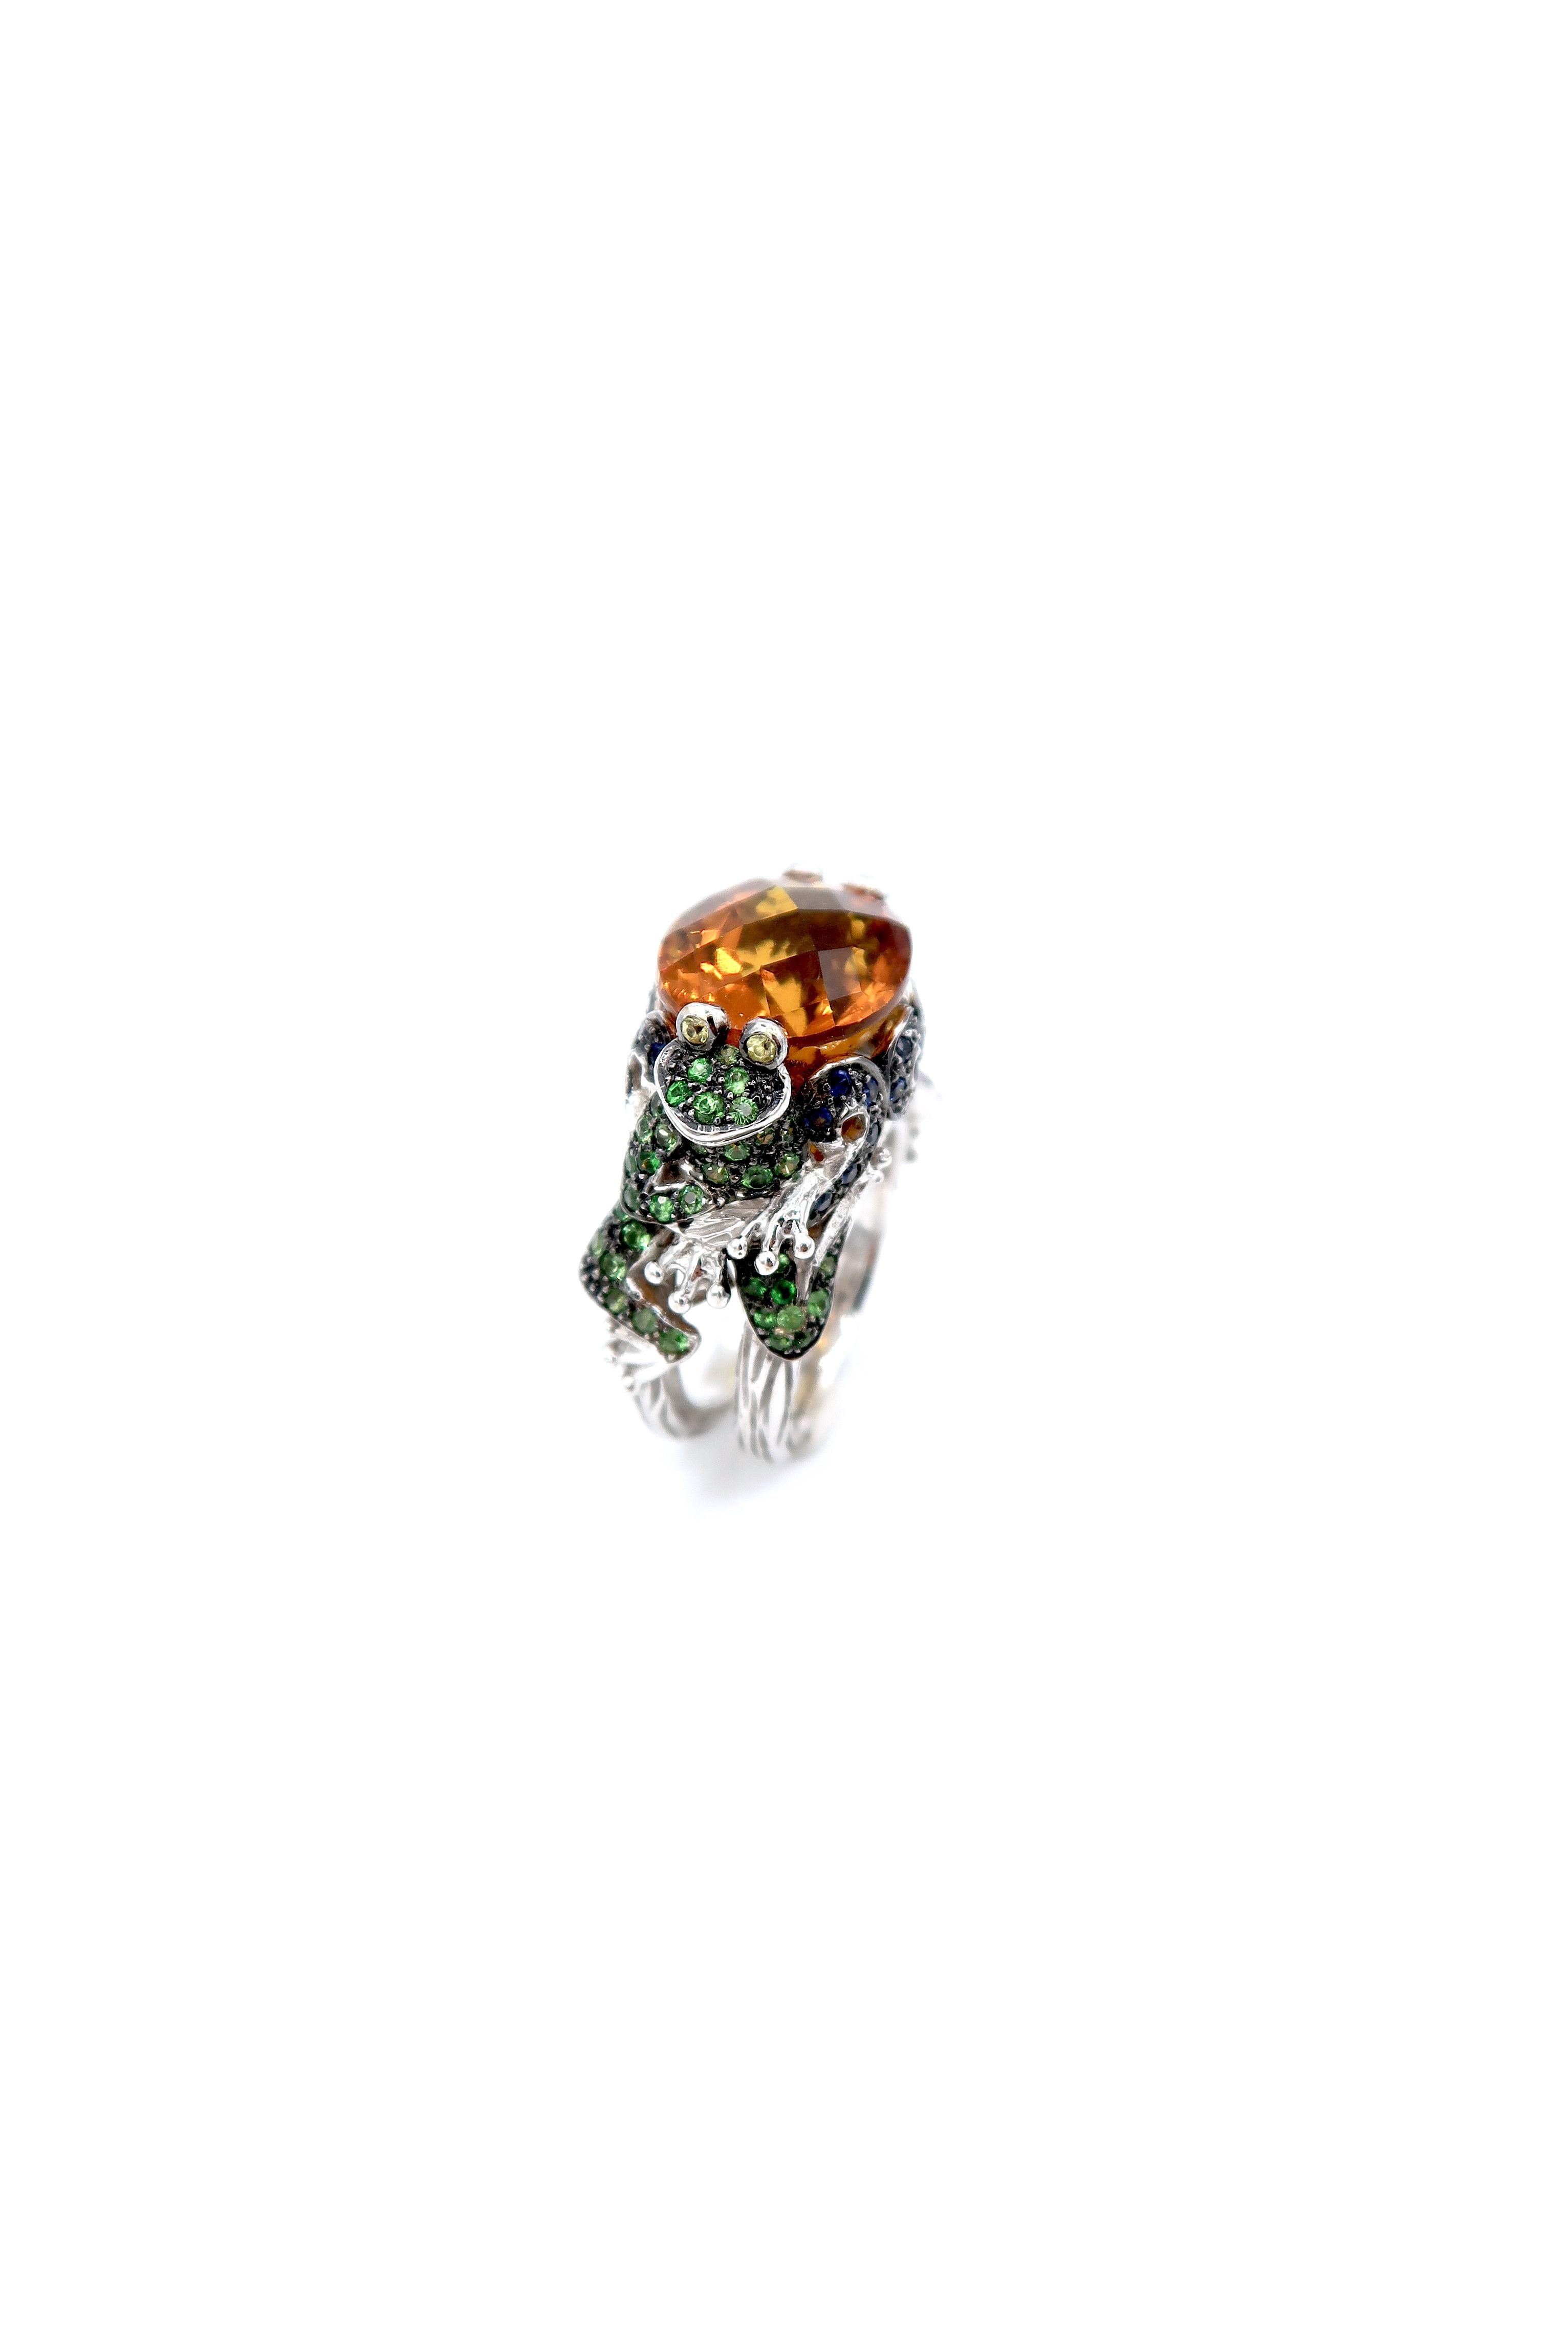 Frog Prince 9.25 Carat Citrine Blue Pink Sapphire Tsavorite Gold Cocktail Ring In New Condition For Sale In Bangkok, TH